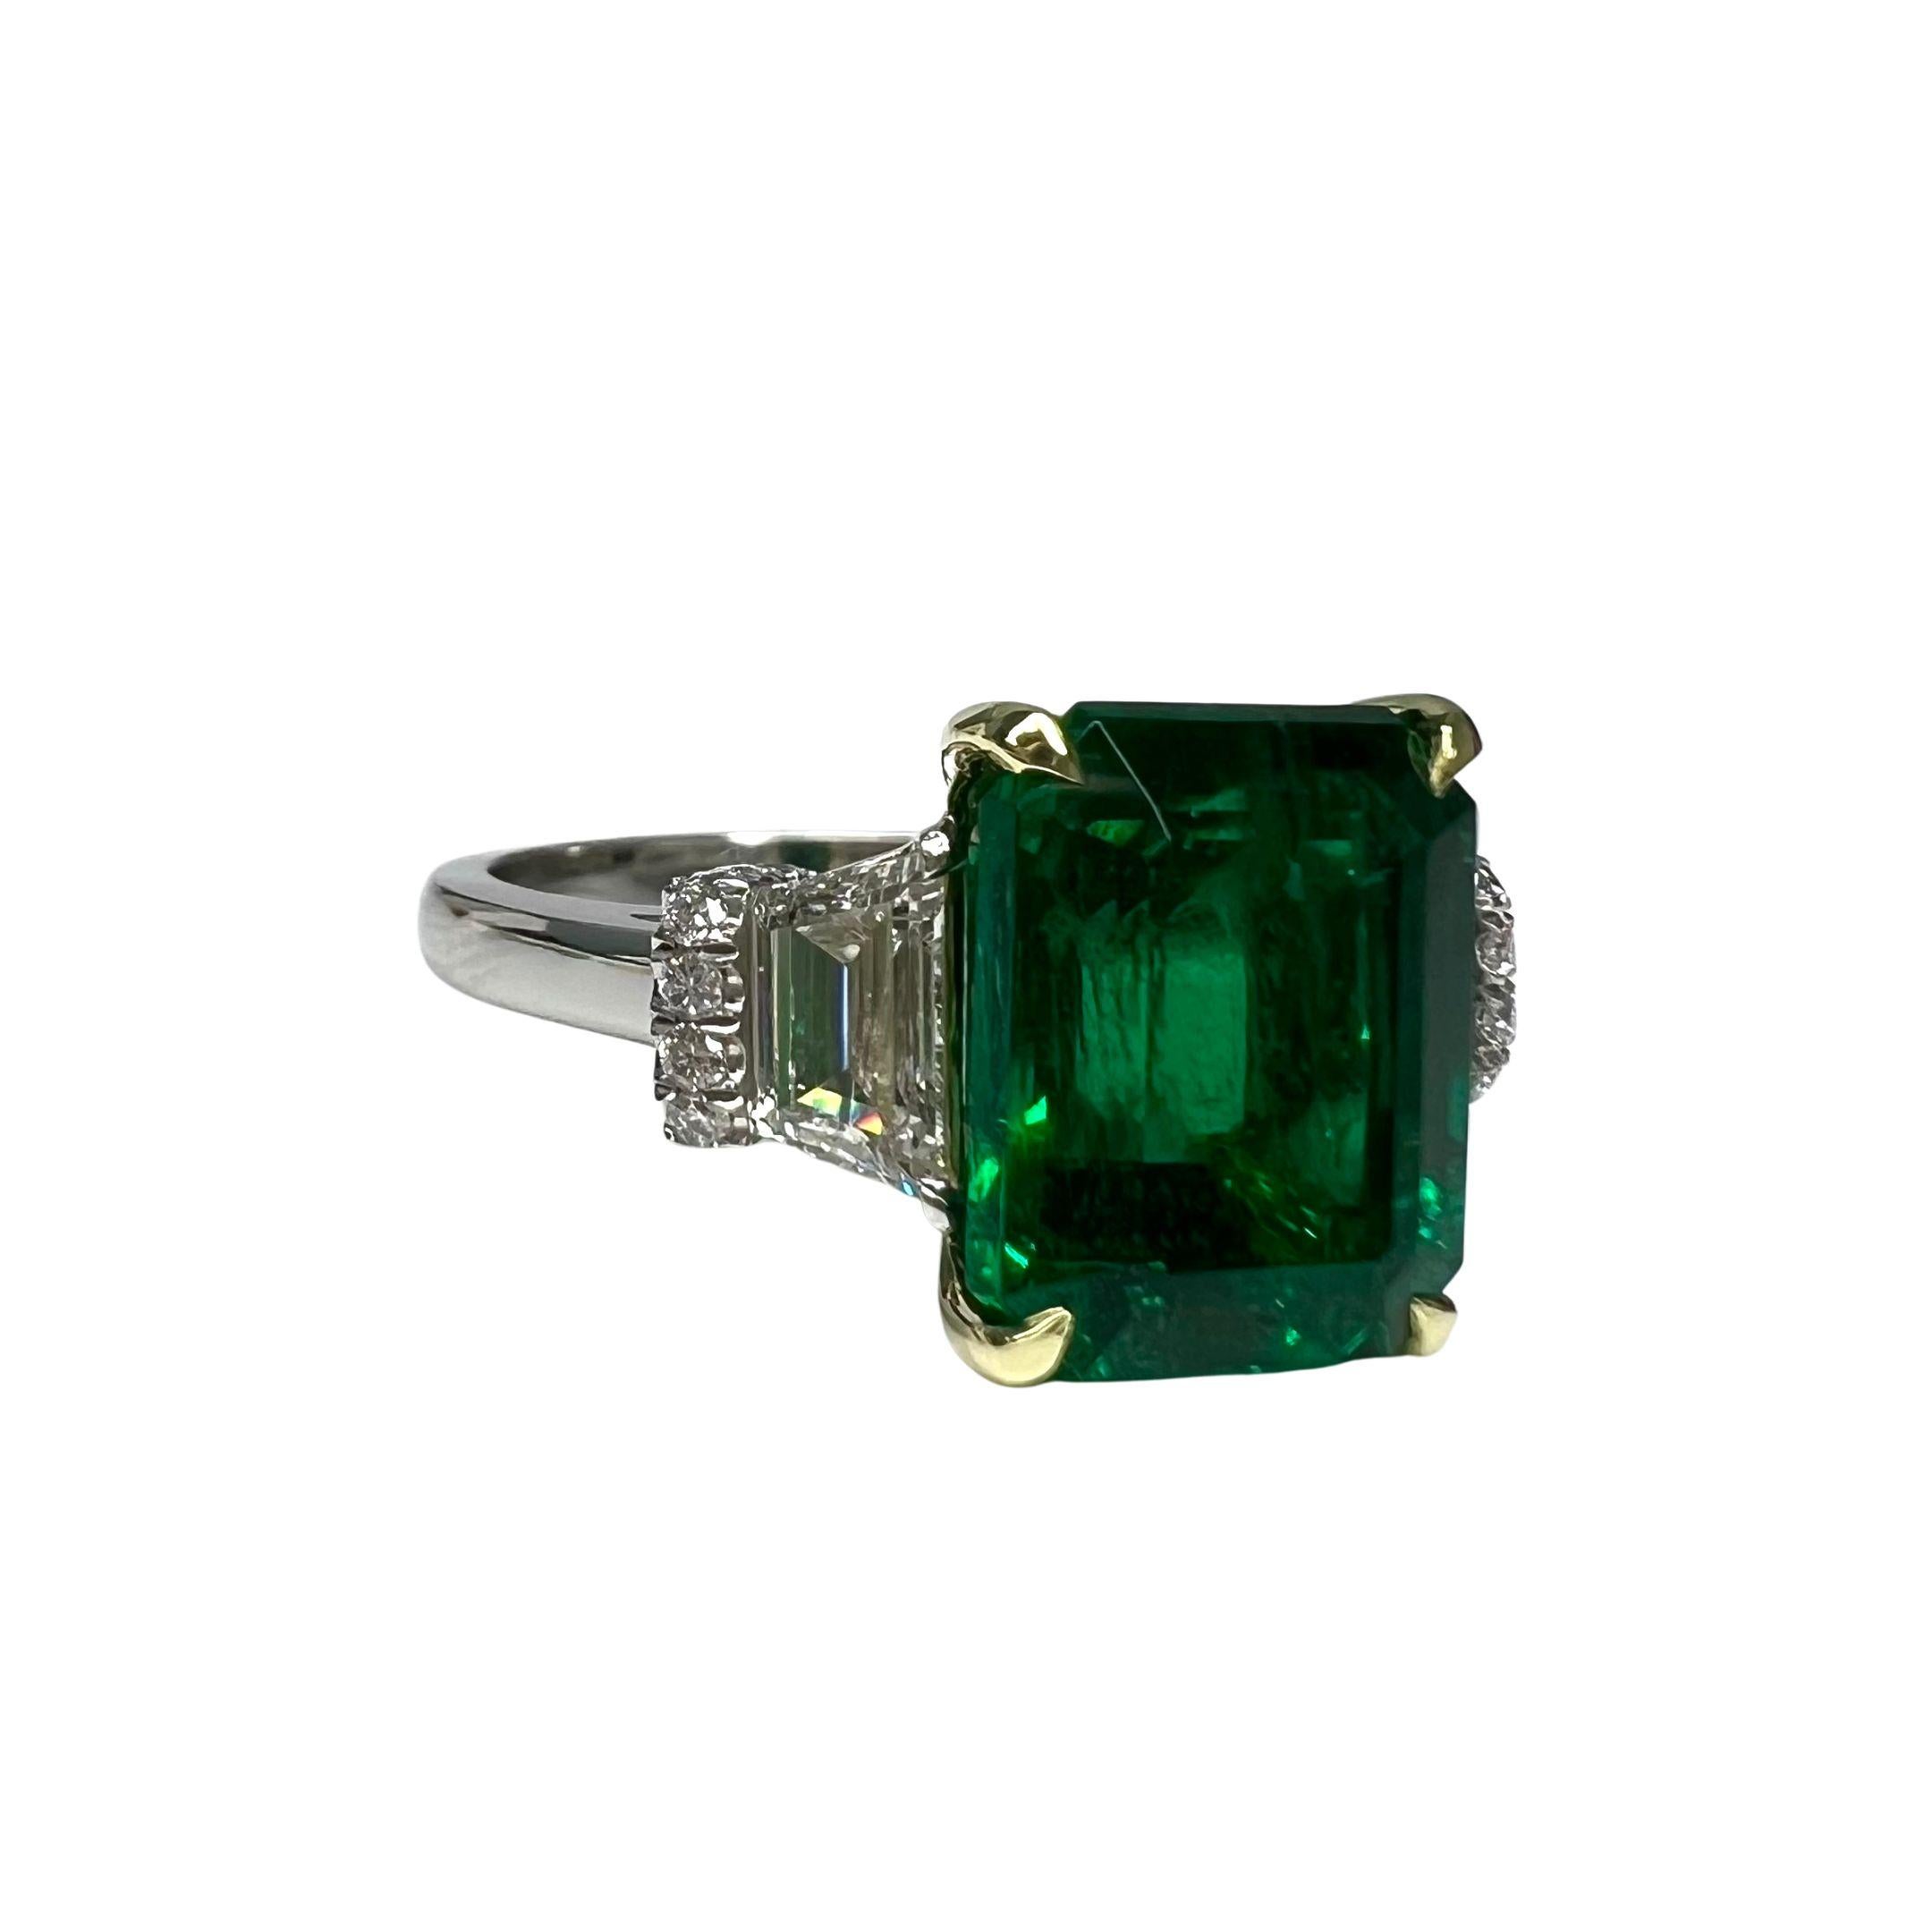 Emerald Weight: 5.57 CTS
Measurements: 11.6 x 9.4 mm
Trapezoid Diamond Weight: 0.91 CT (G-VS)
Round Diamond Weight: 0.24 CTS
Metal: Platinum/18K Yellow Gold Basket
Ring Size: 6
Shape: Emerald-Cut
Color: Intense Green
Hardness: 7.5-8
Birthstone: May